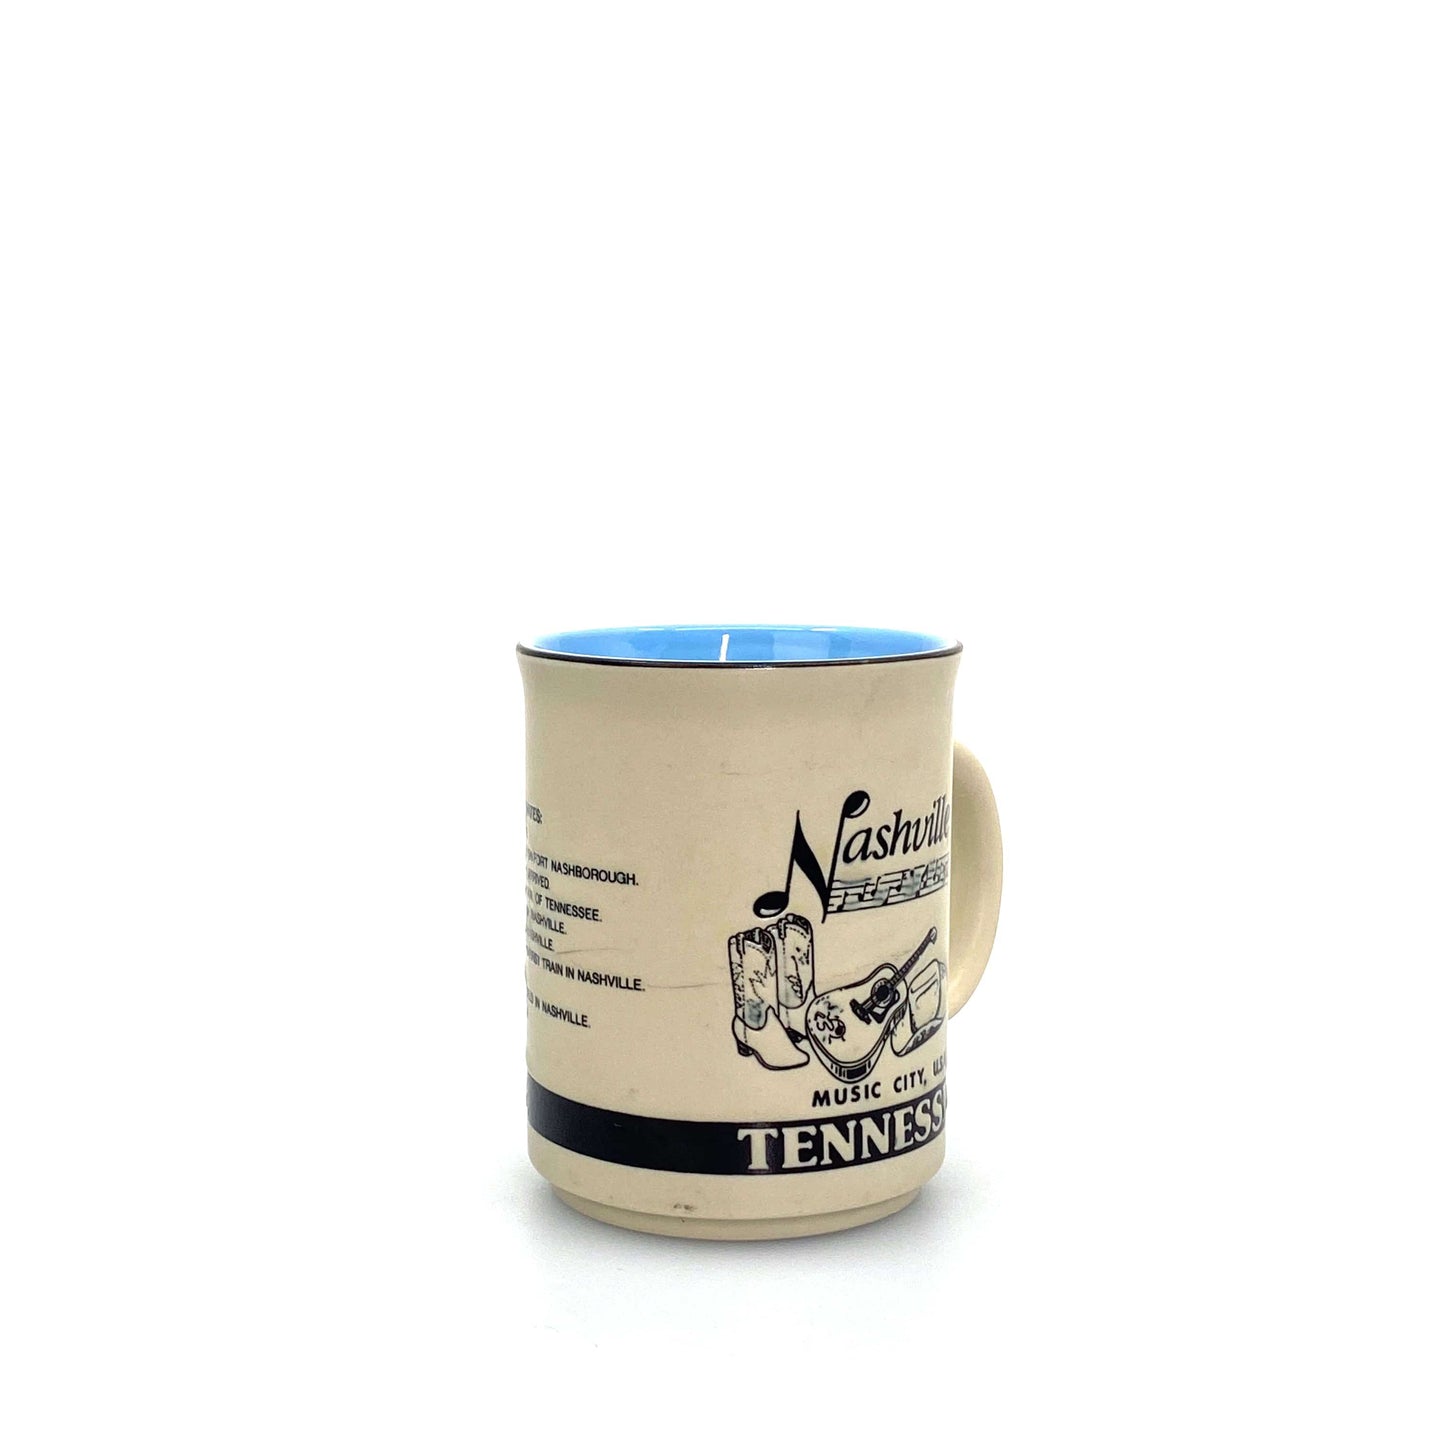 State of Tennessee Nashville Music City USA Coffee Cup 16 Oz Beige Blue